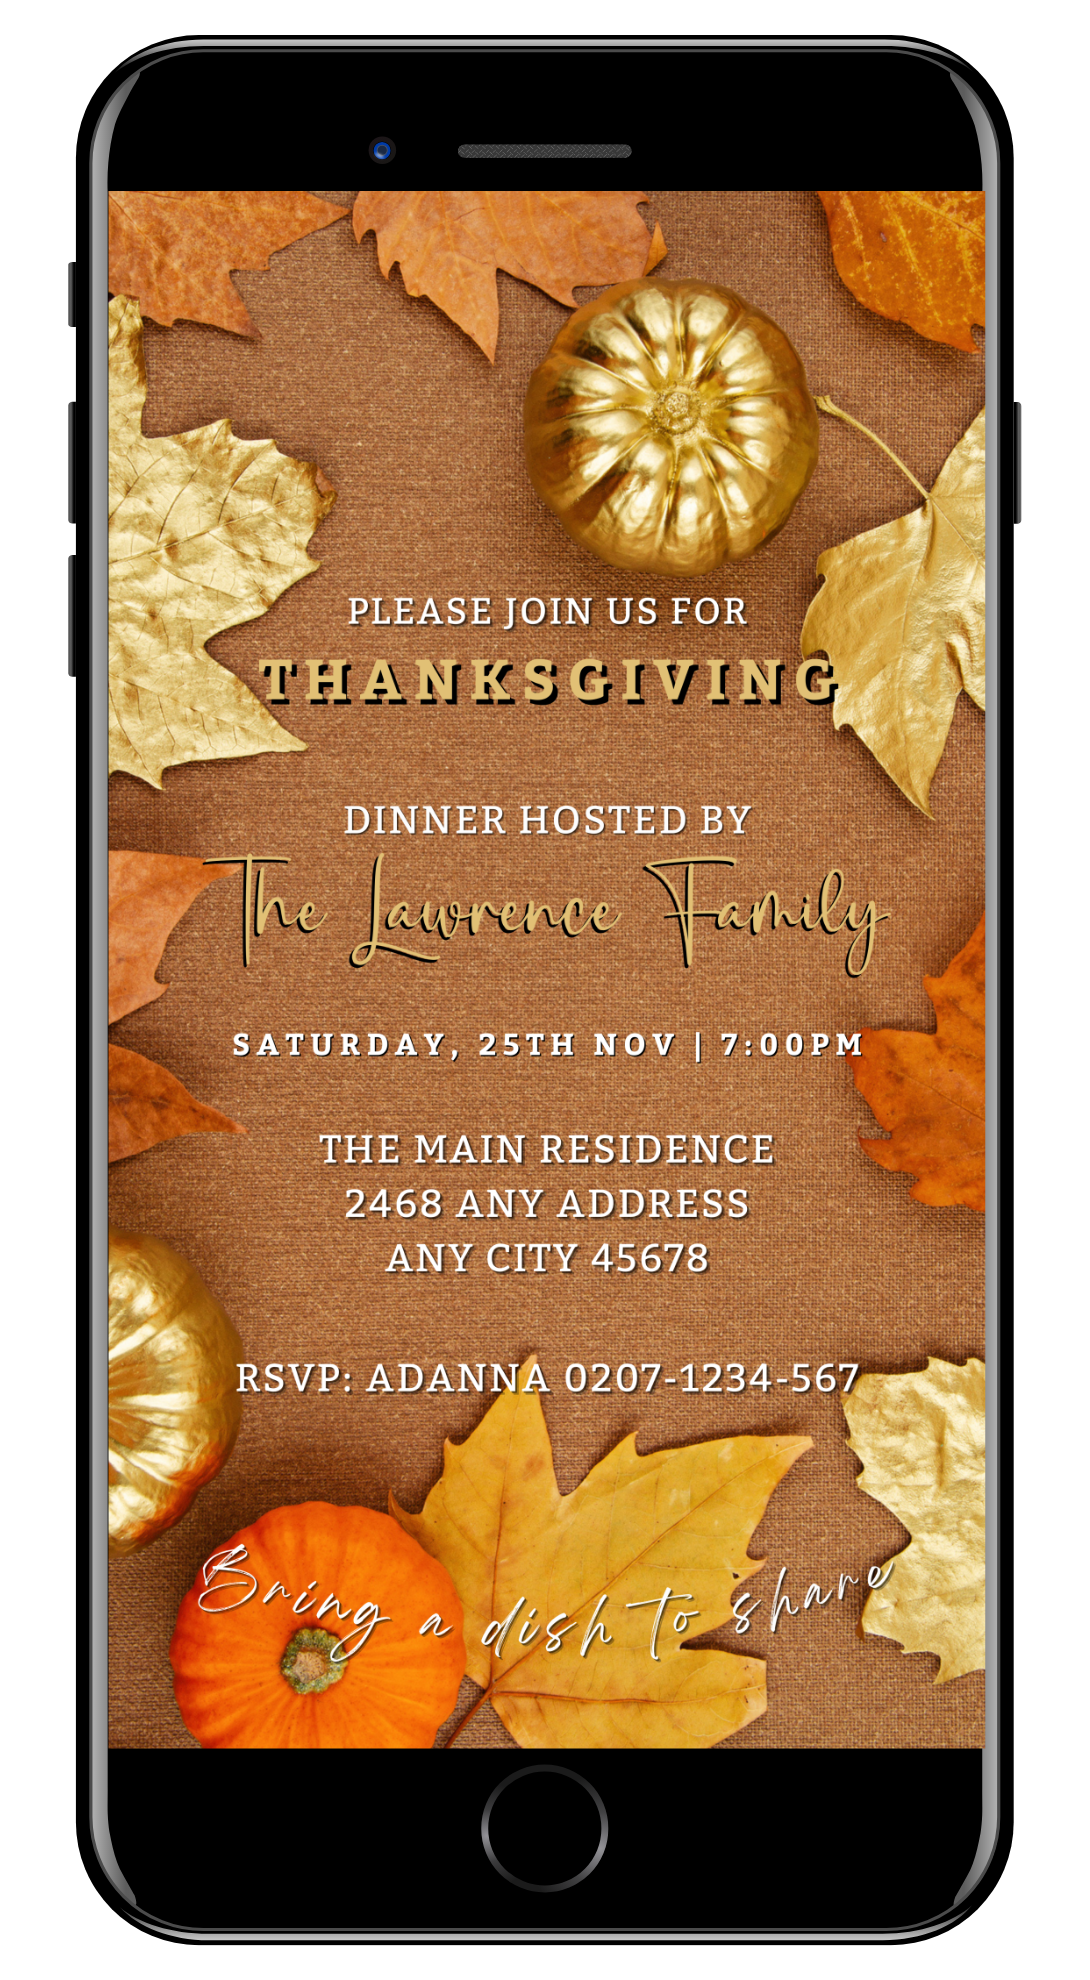 Thanksgiving Evite template with golden leaves and pumpkins on a cell phone screen.